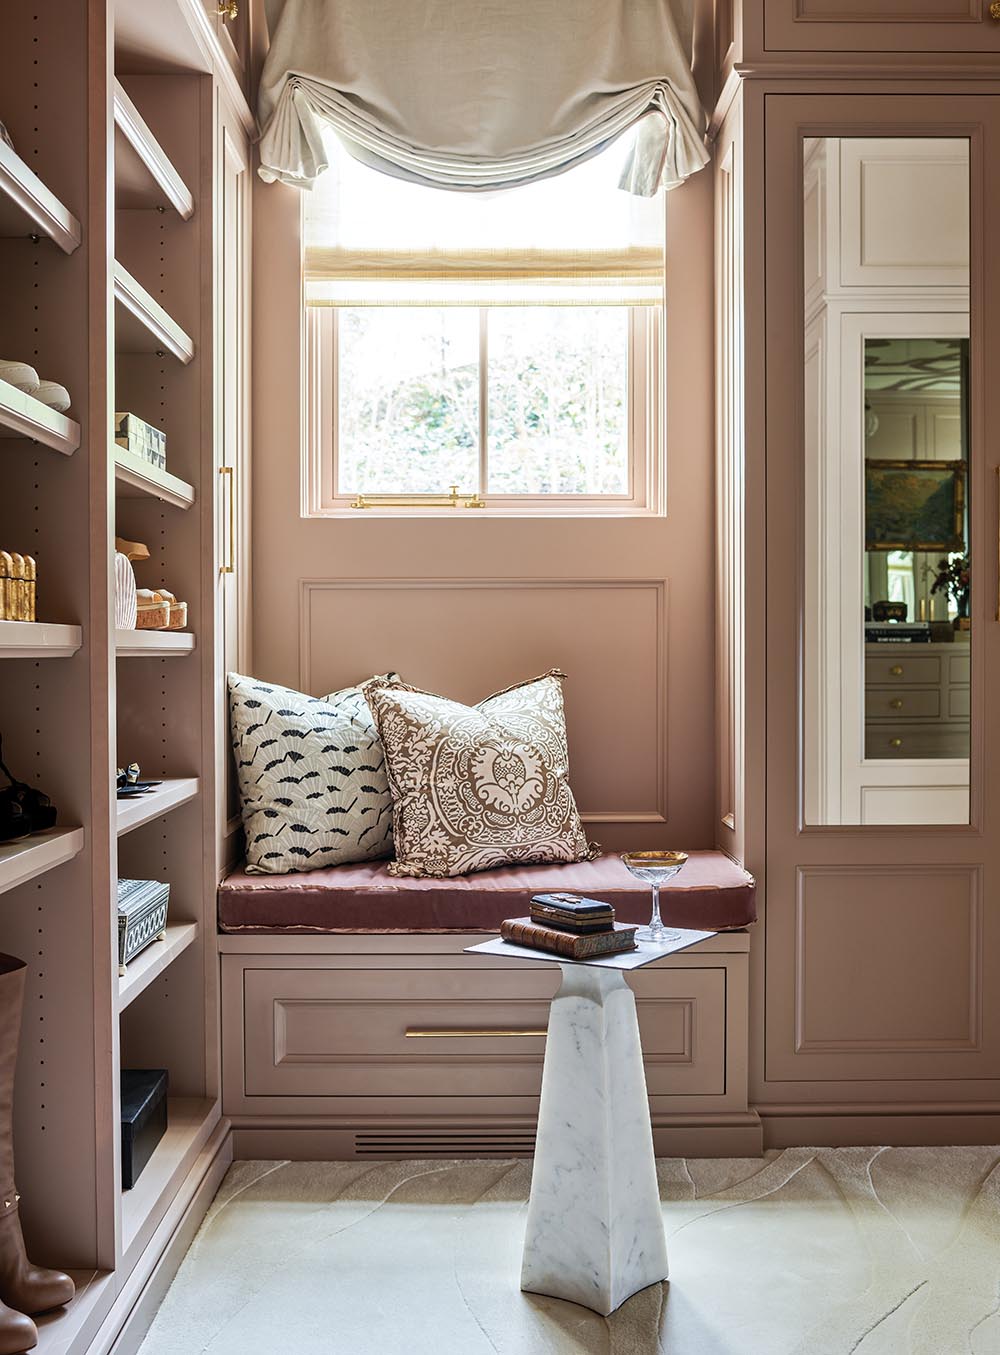 Window seat in the lady's dressing room designed by Julie Dodson for he Flower Atlanta Showhouse